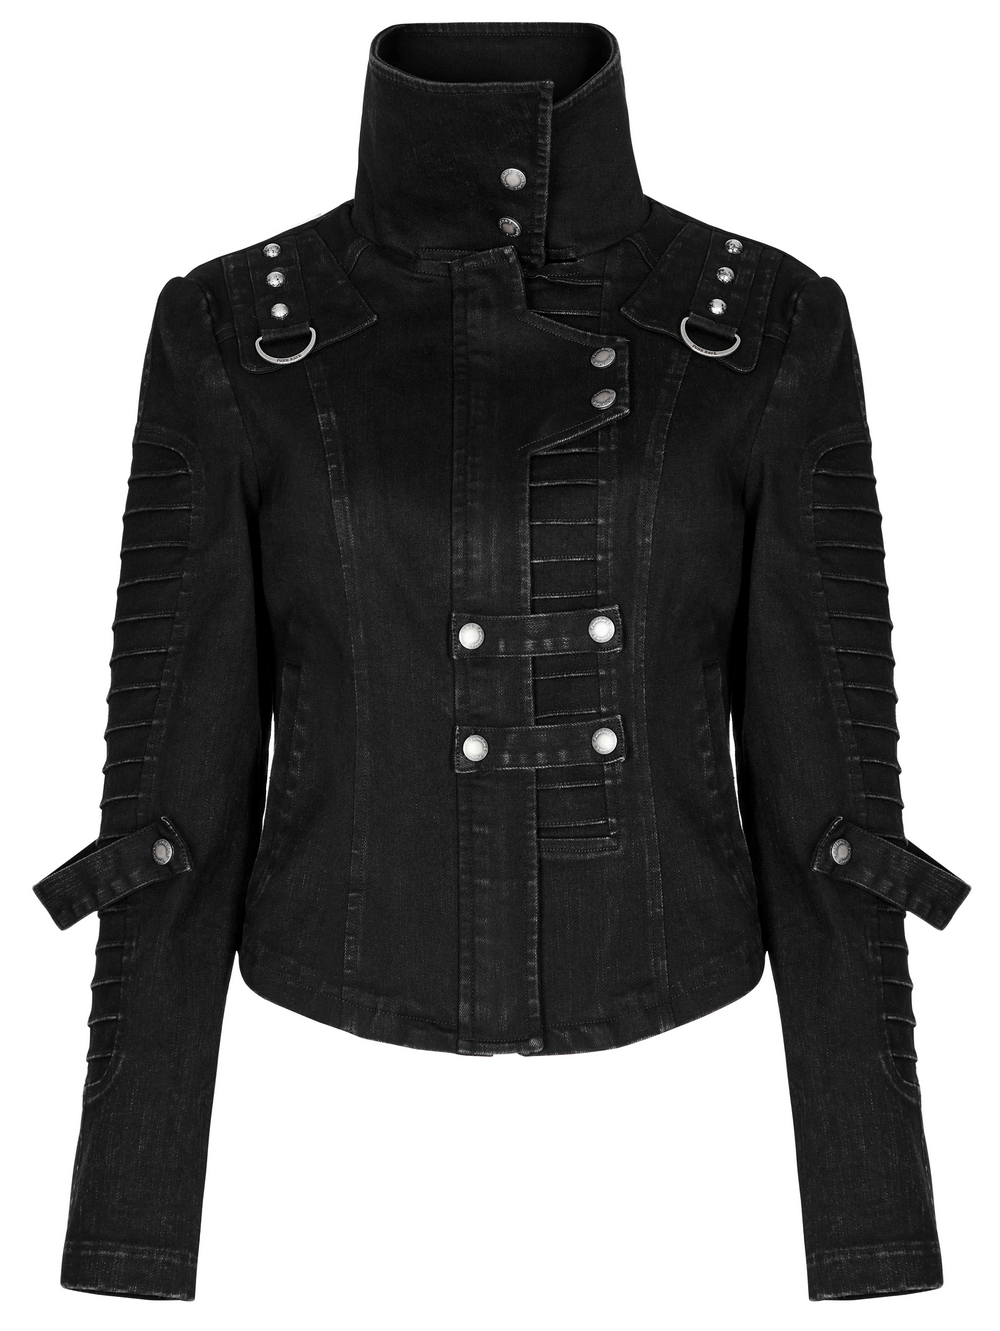 Gothic Female Fitted Denim Jacket with Edgy Detailing - HARD'N'HEAVY